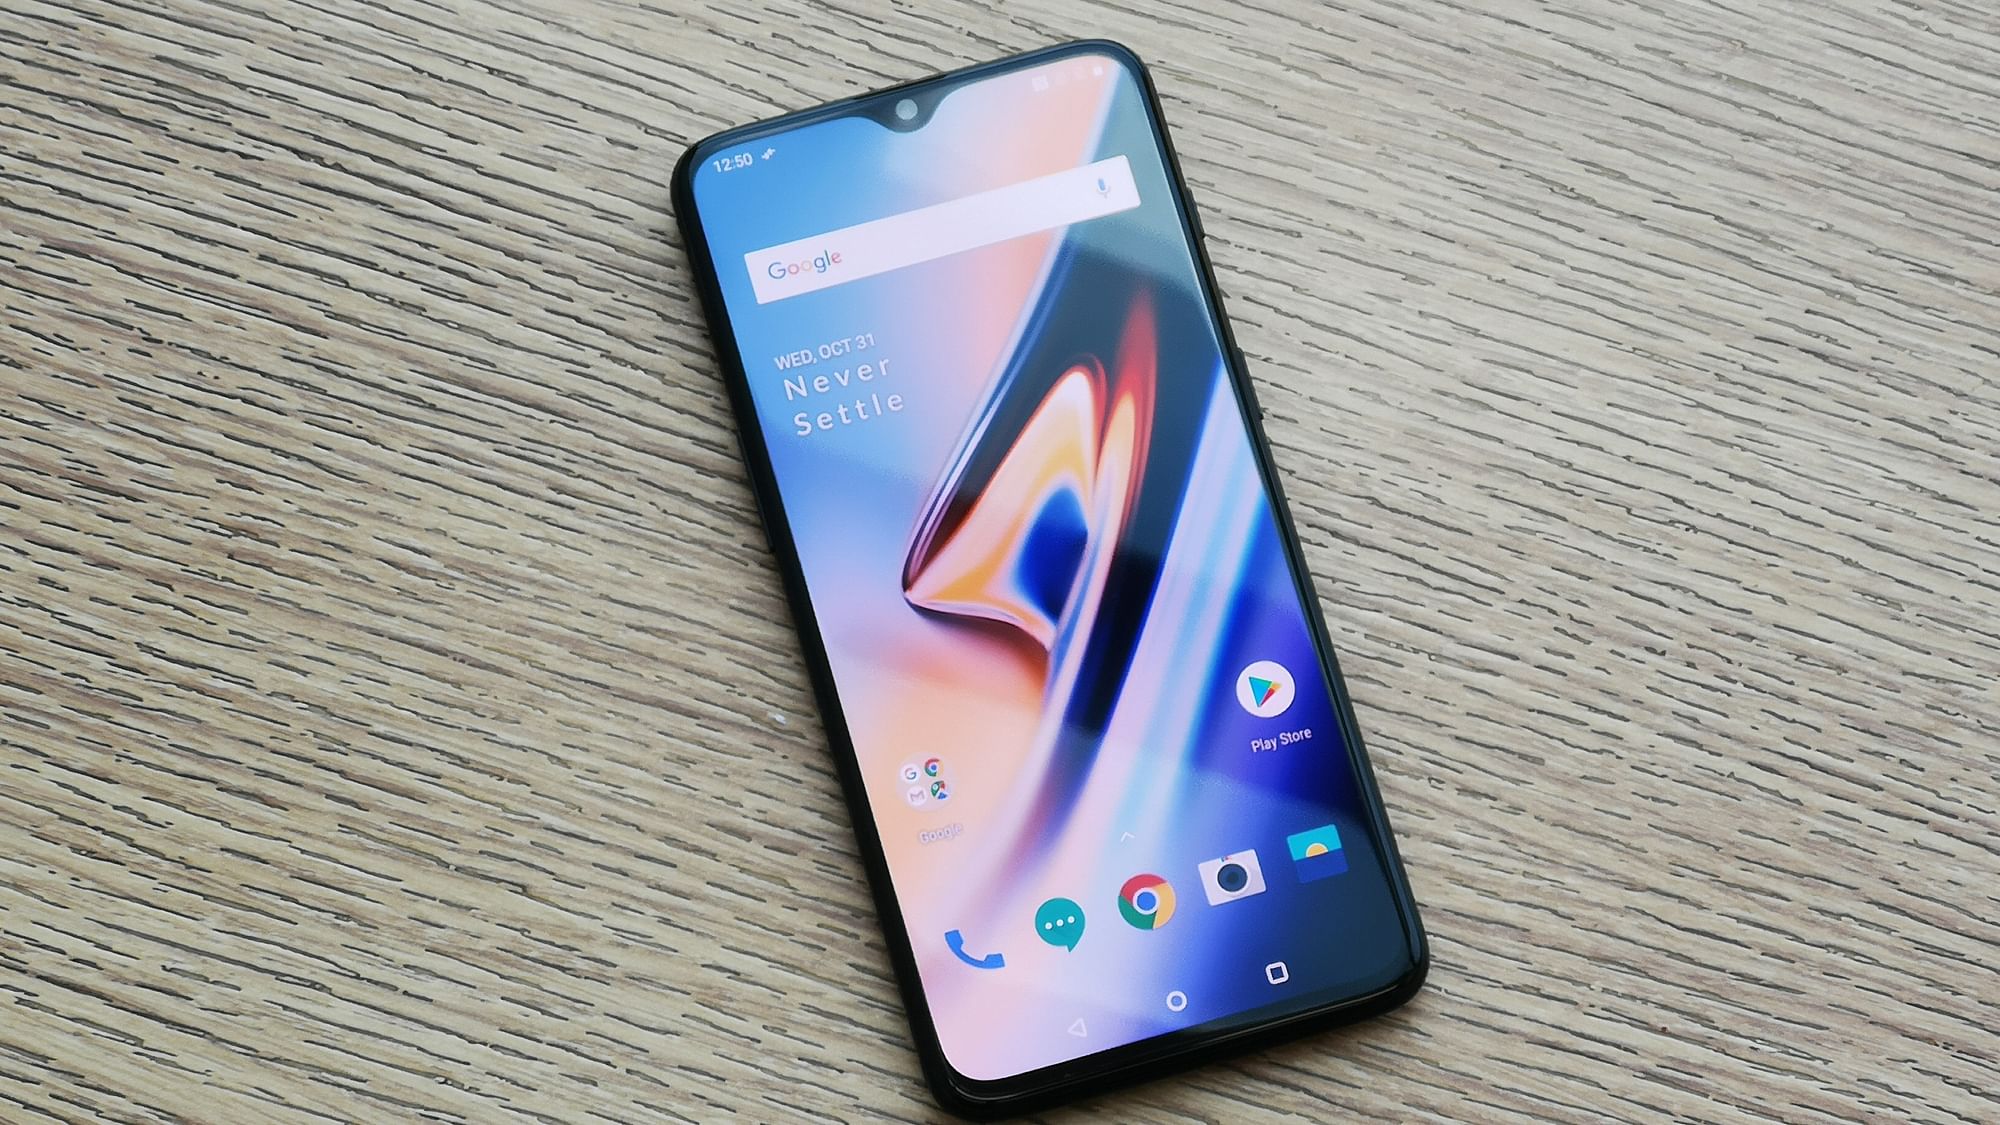 Water drop notch makes its debut on a OnePlus phone with the 6T.